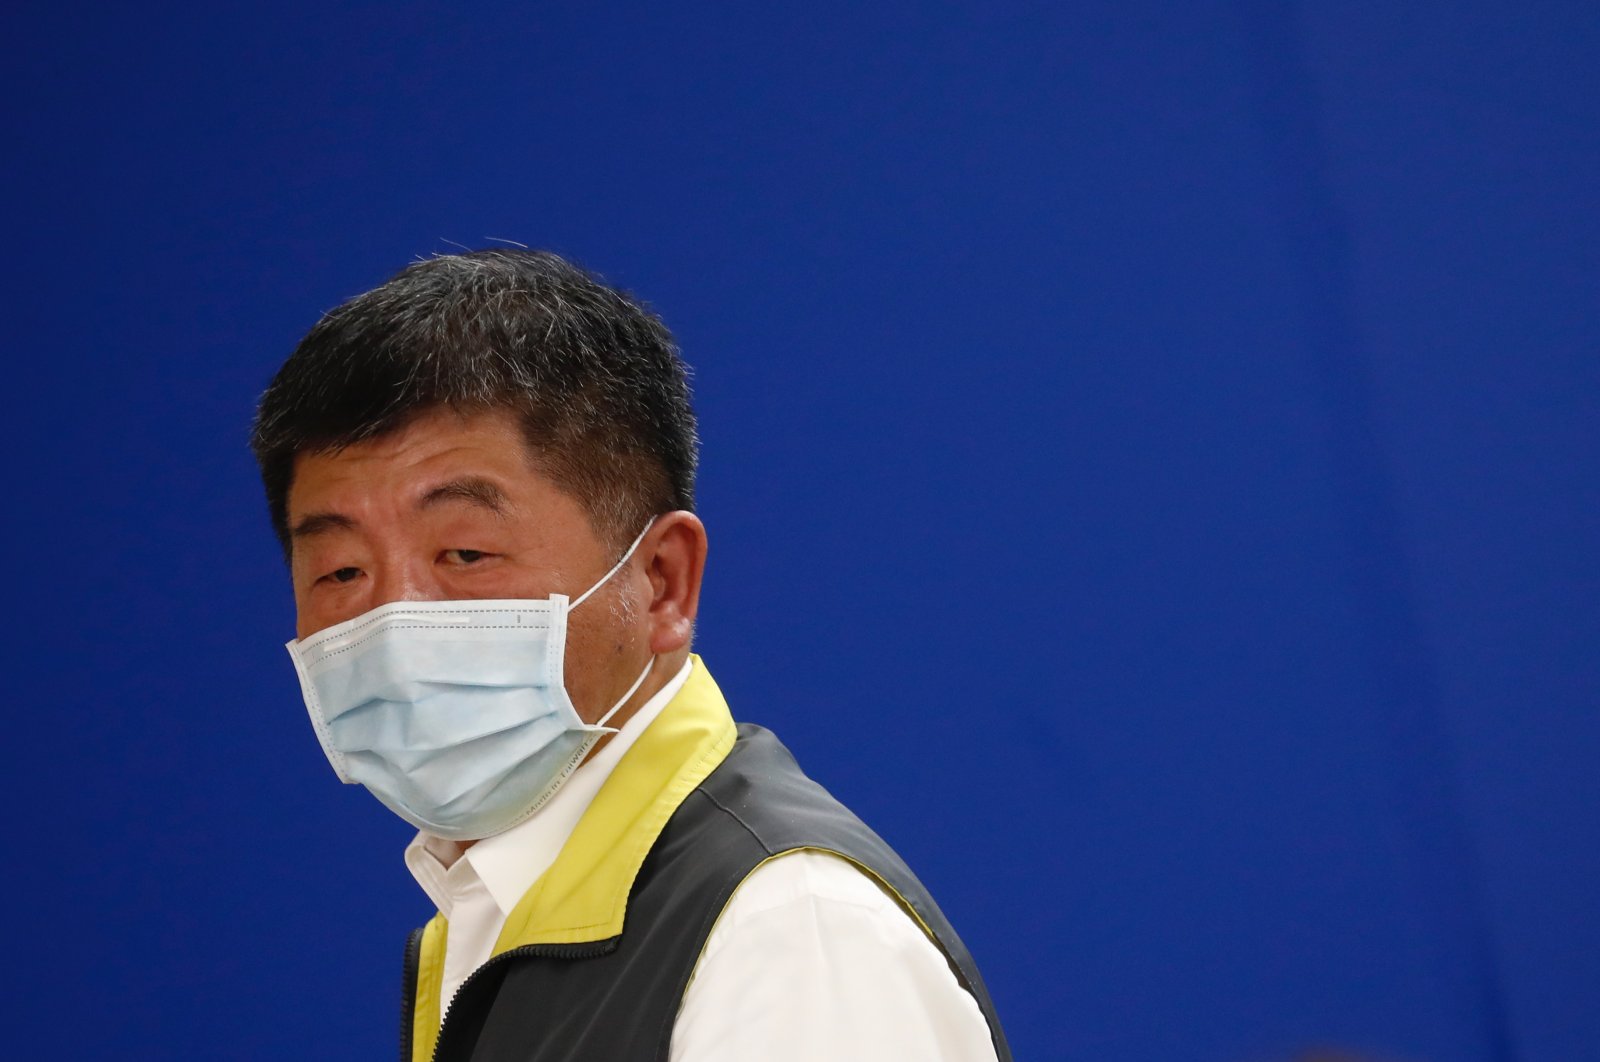 Taiwan Minister of Health and Welfare Chen Shih-Chung leaves after speaking during a press briefing with foreign journalists about the current measures and status in the fight against coronavirus and COVID-19 in Taipei, Taiwan, May 6, 2020. (EPA Photo)